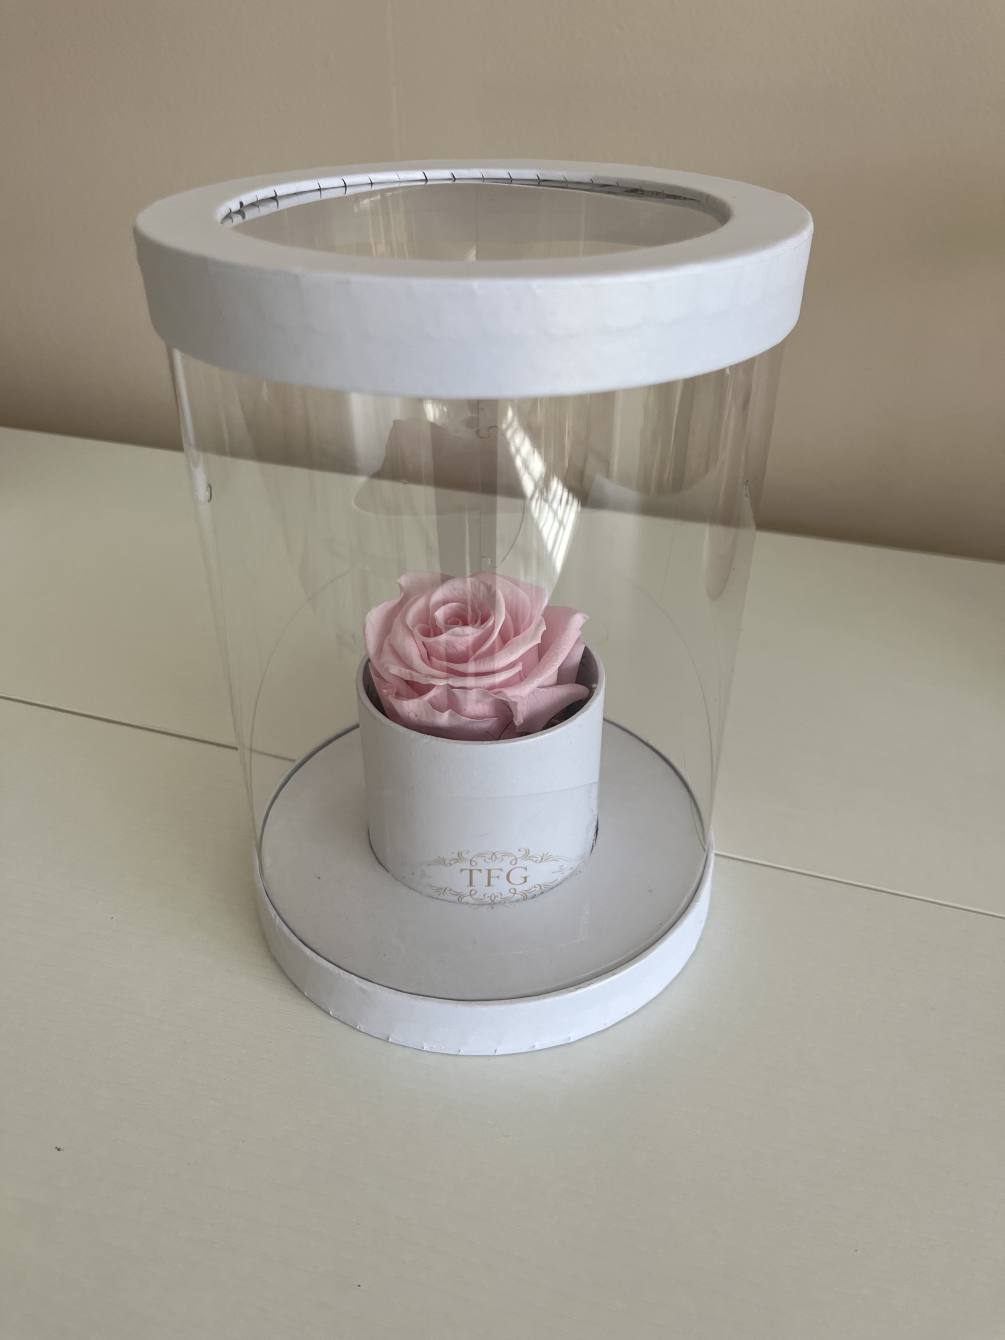 Preserved pink rose in signature clear box. Real rose that will last